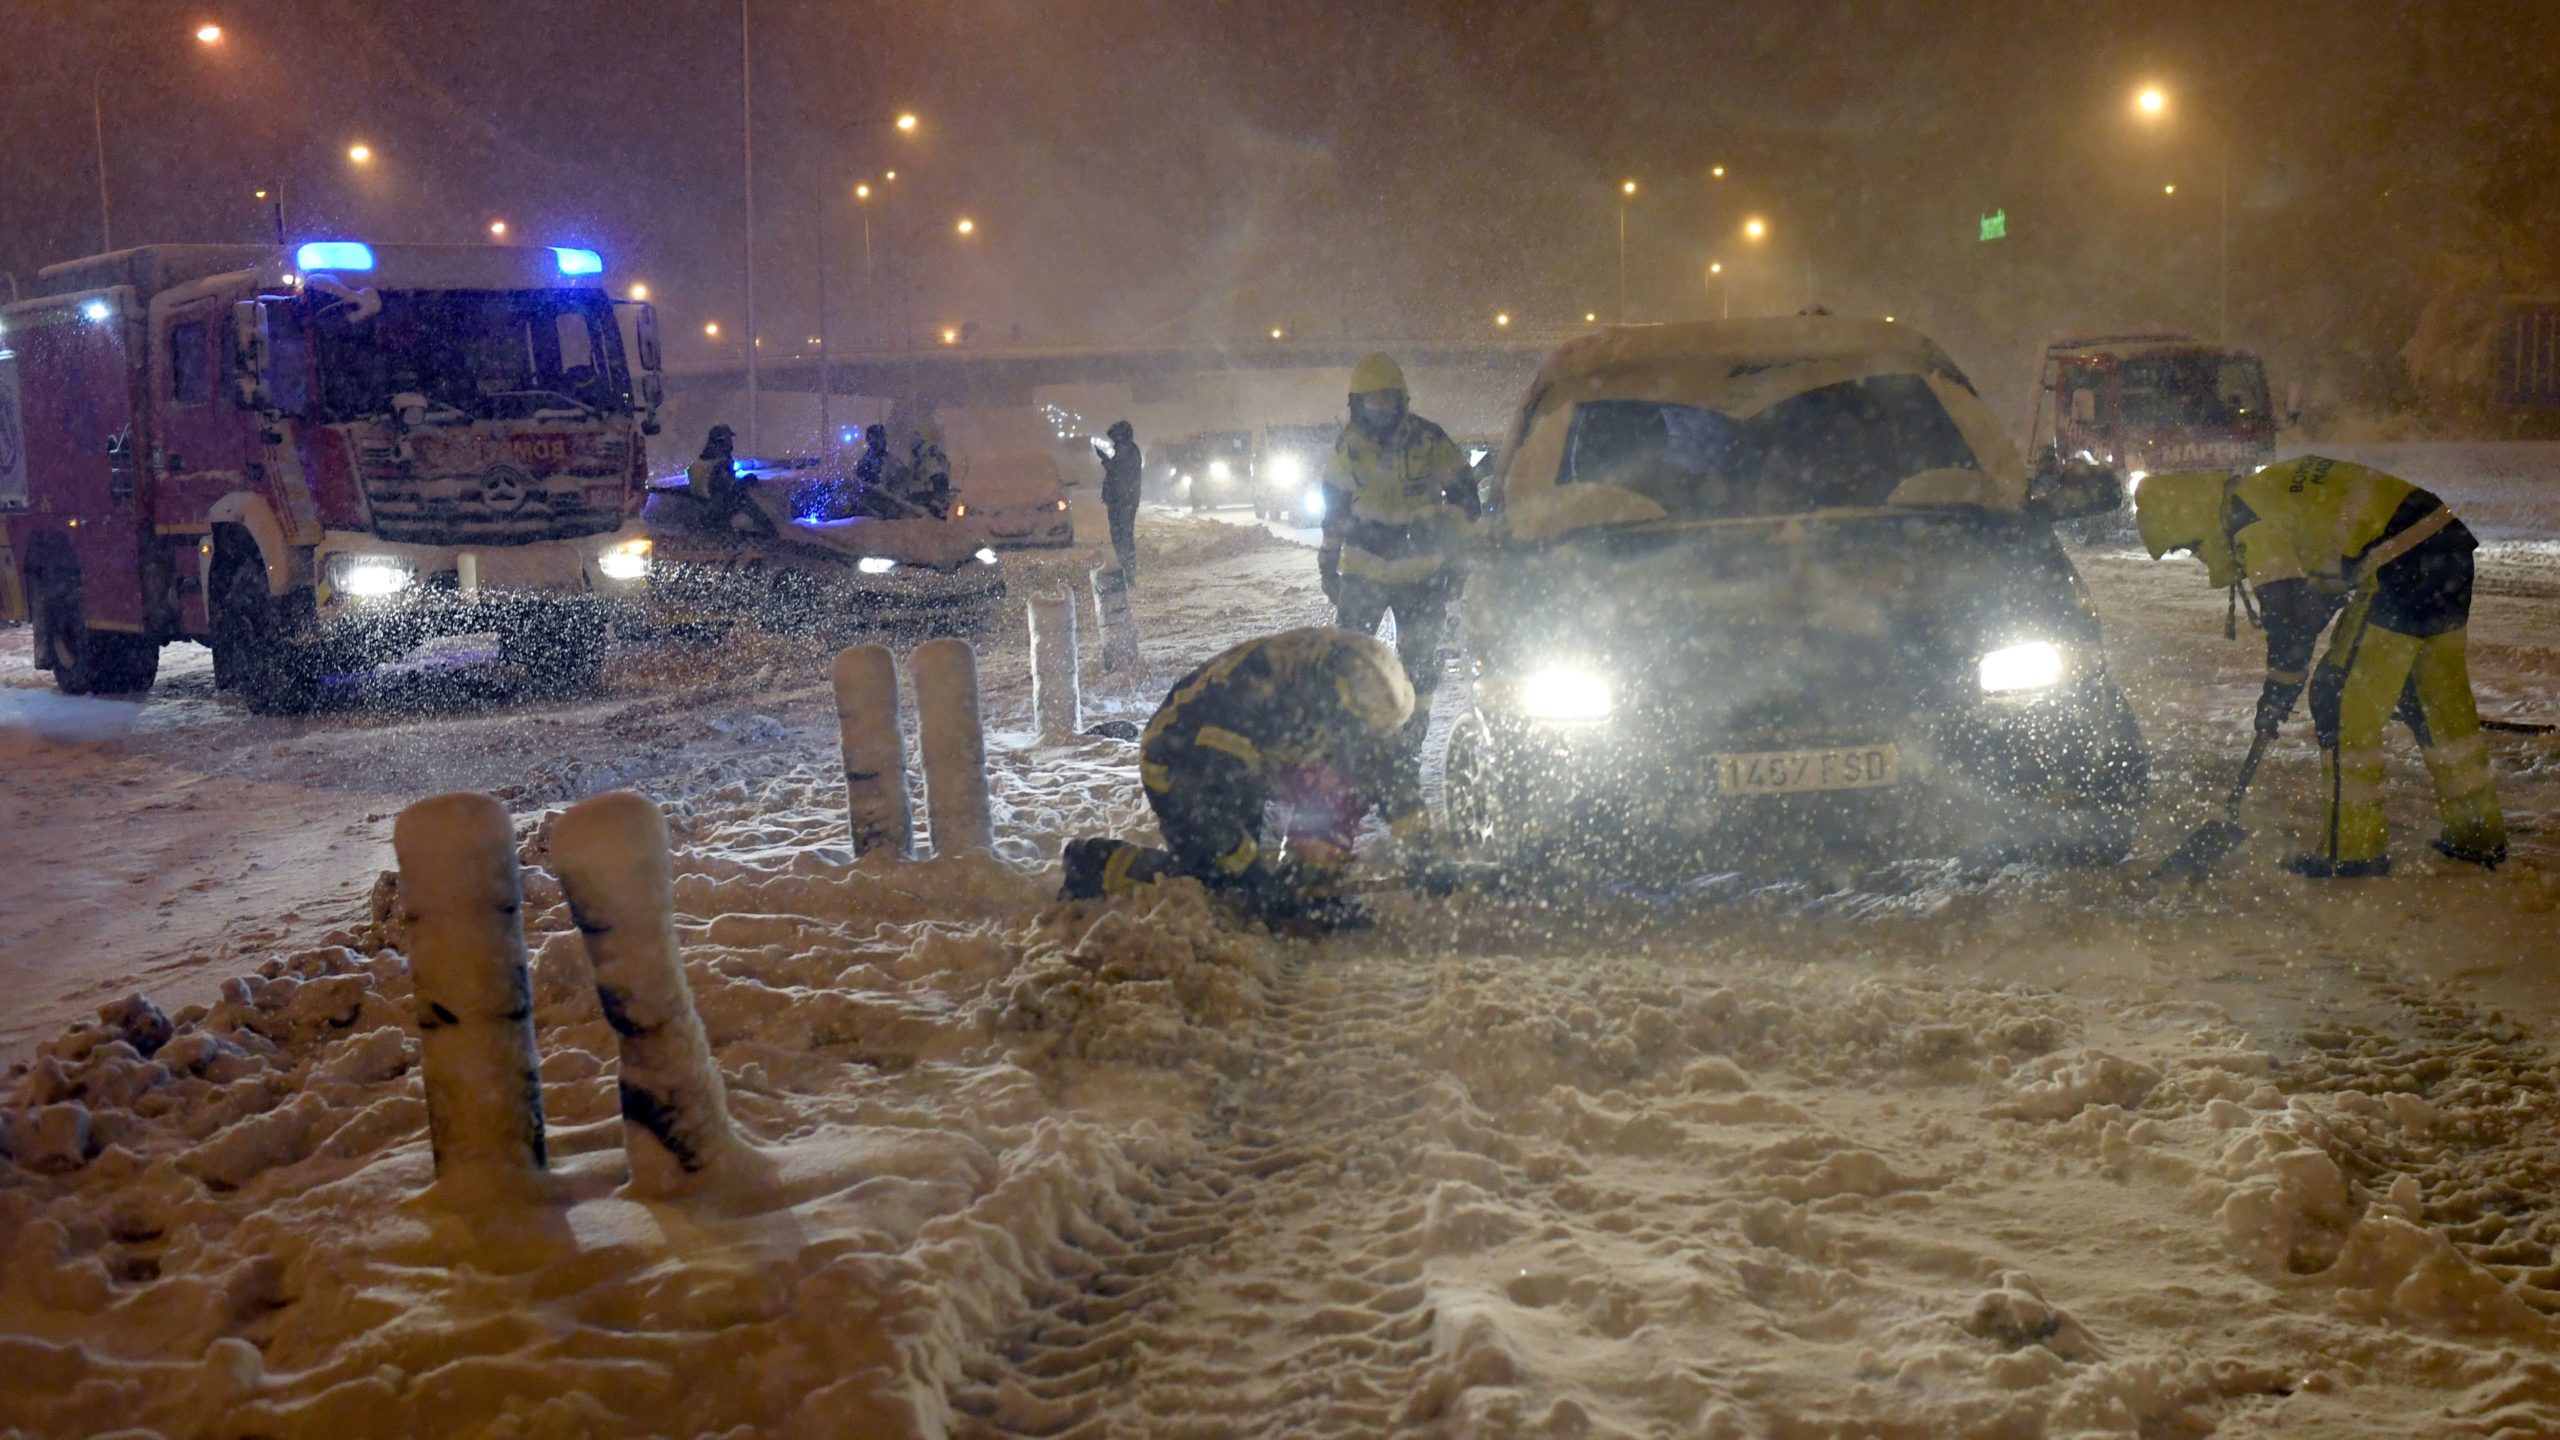 Firefighters help vehicles stuck in the M30 ring road in Madrid due to a heavy snowstorm on January 8, 2021.  (Photo: Oscar Del Pozo/AFP, Getty Images)